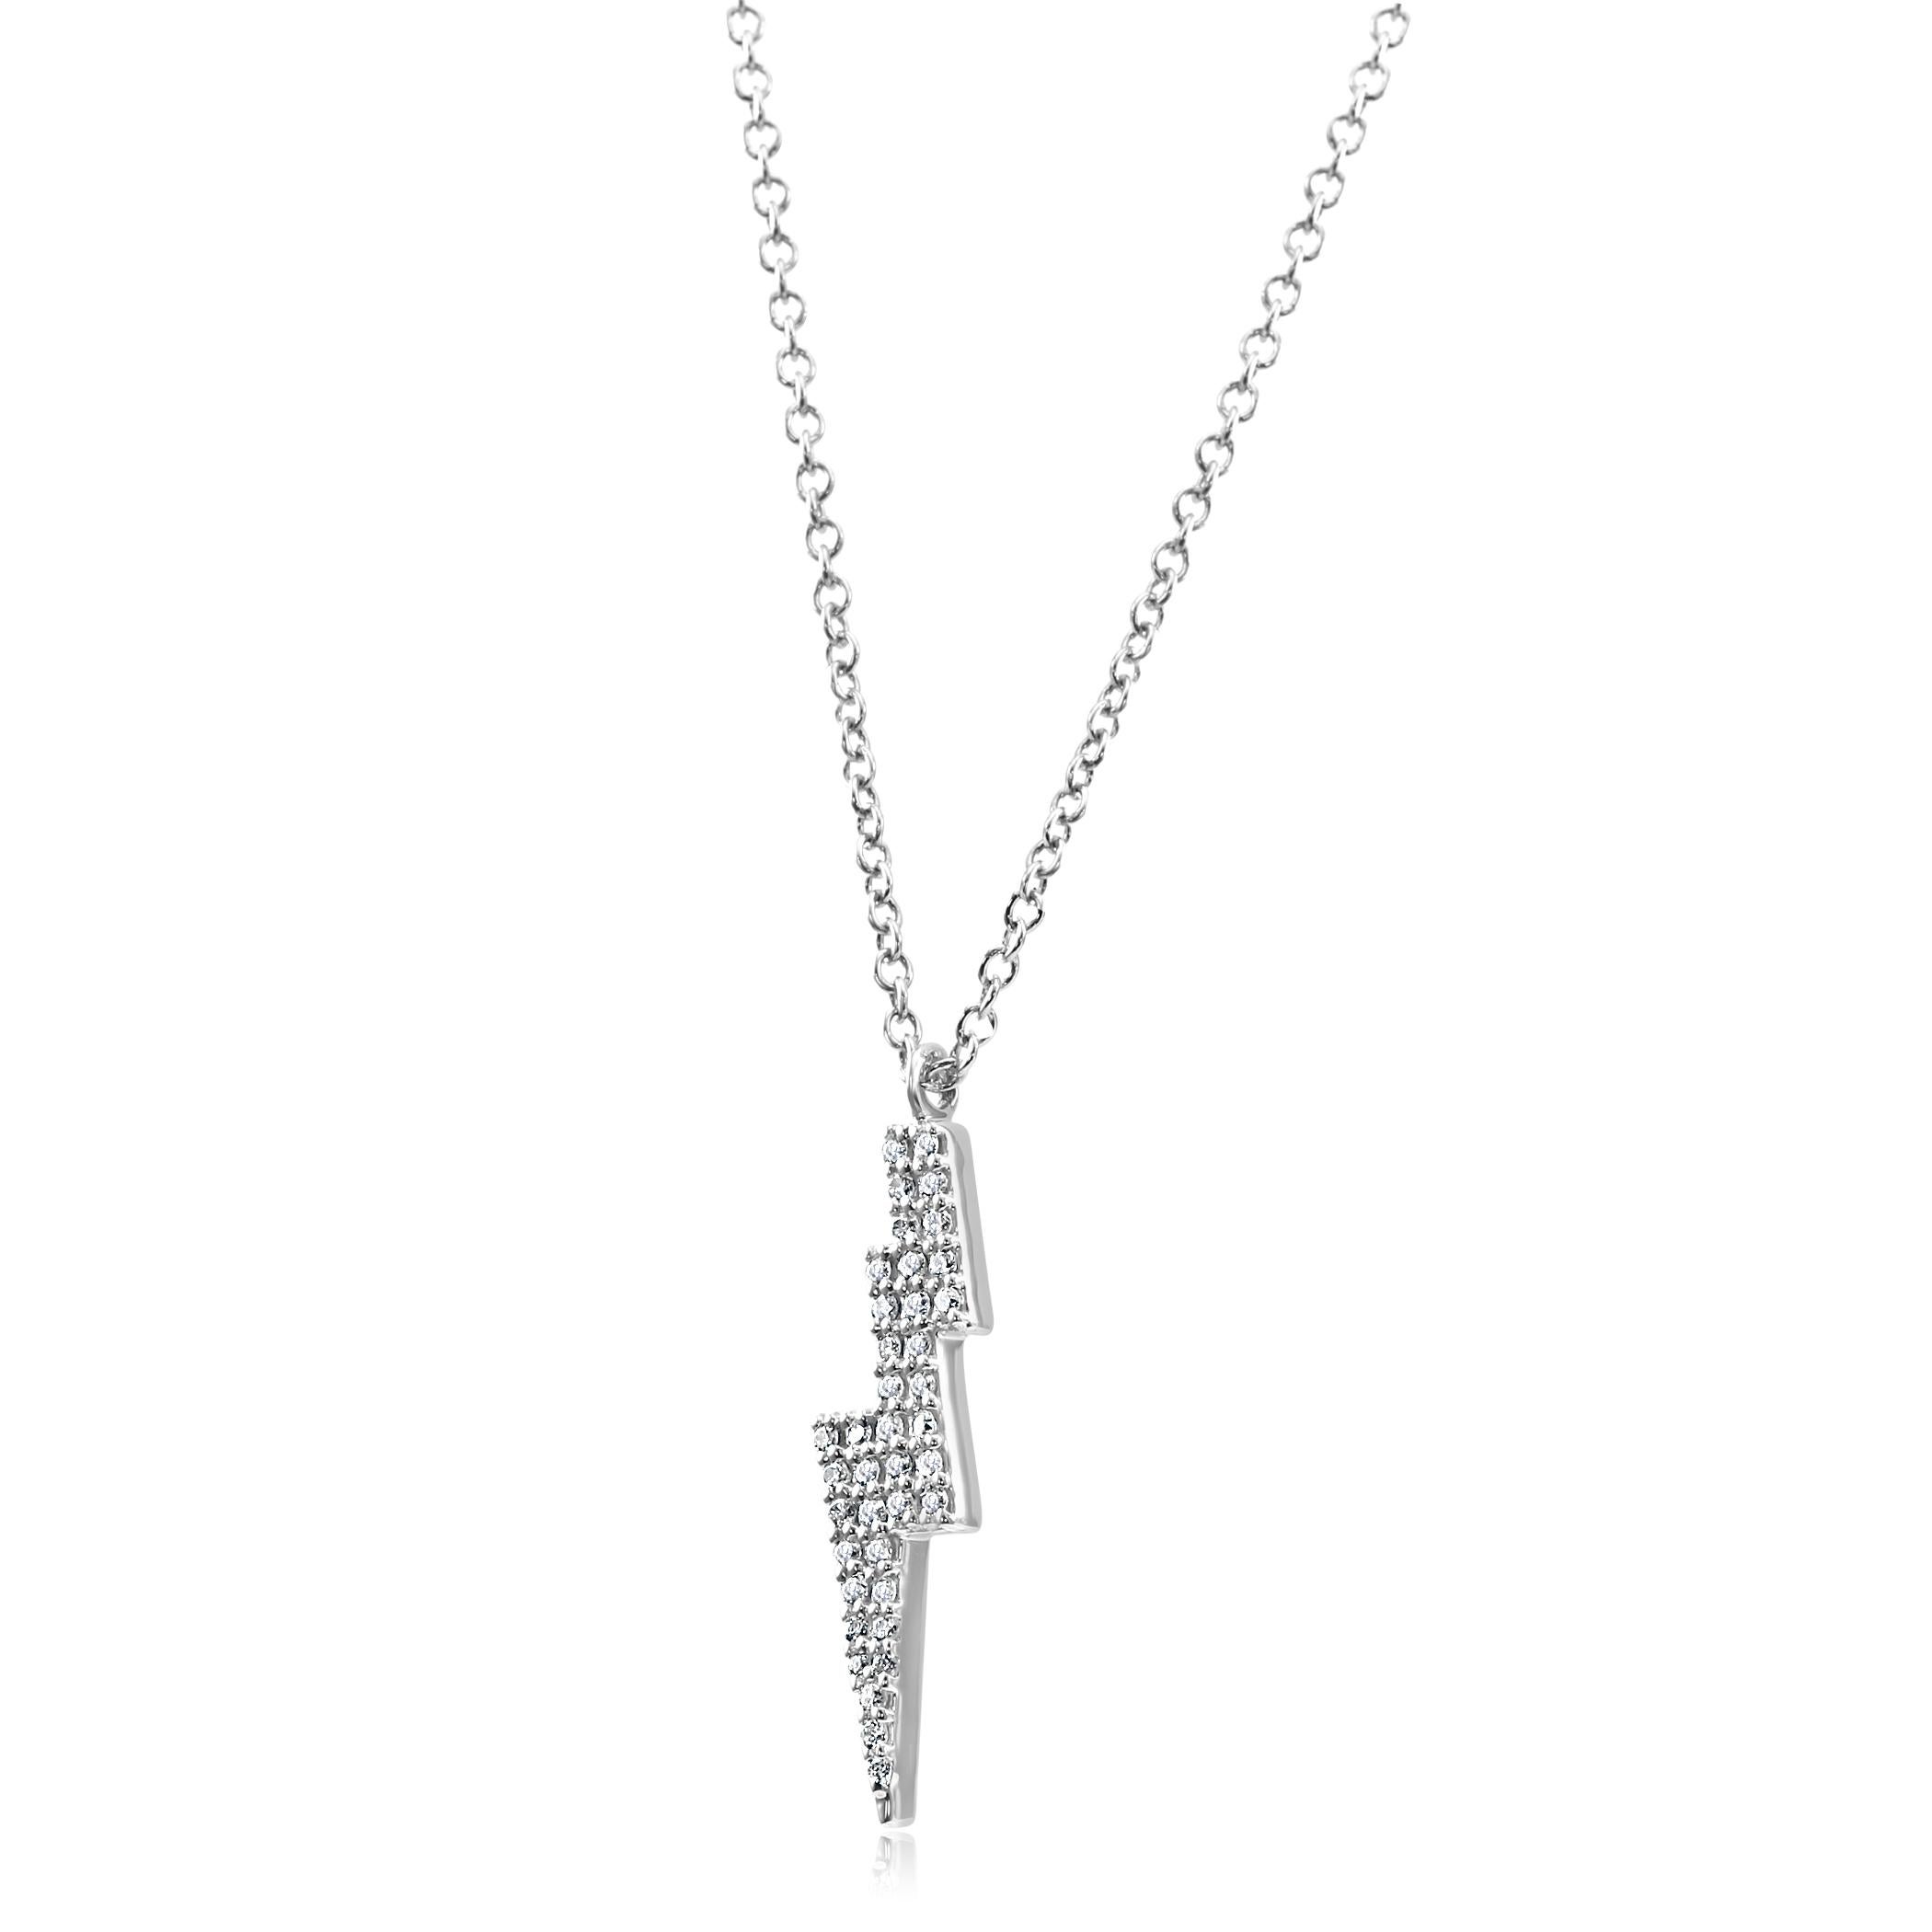 39 White Colorless SI Clarity Diamond Rounds 0.15 Carat Set in Stylish everyday wear 14K White Gold Dangle Drop Pendant Chain Necklace. Can be worn as 18 inches or 16 inches. 

Total Diamond Weight 0.15 Carat

Style available in all gold colors and